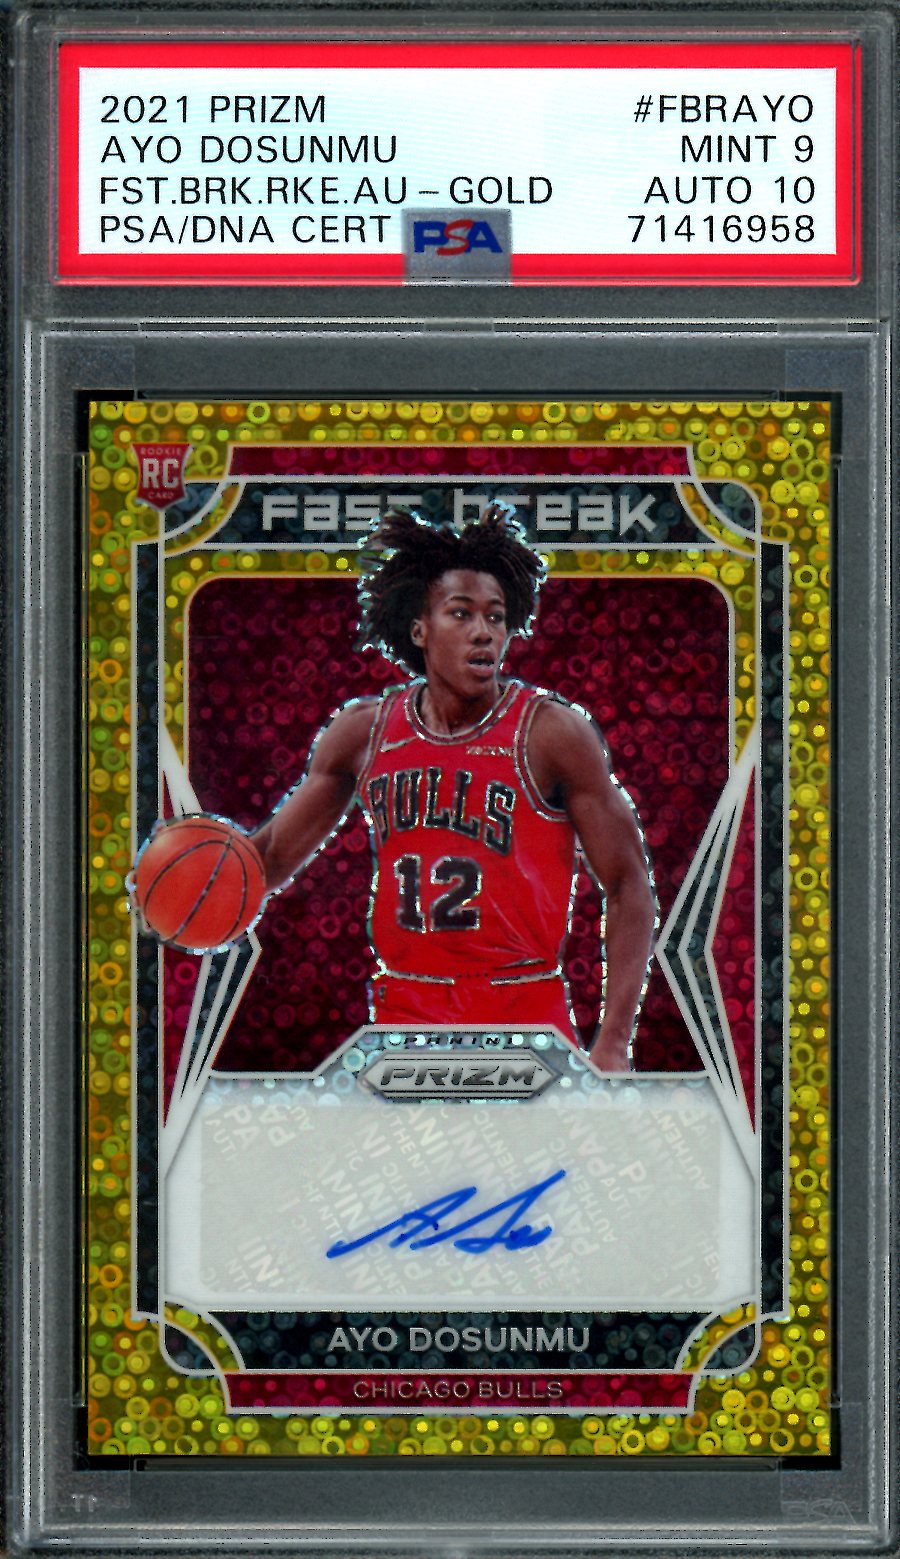 Ayo Dosunmu Rookie Cards: Value, Tracking & Hot Deals